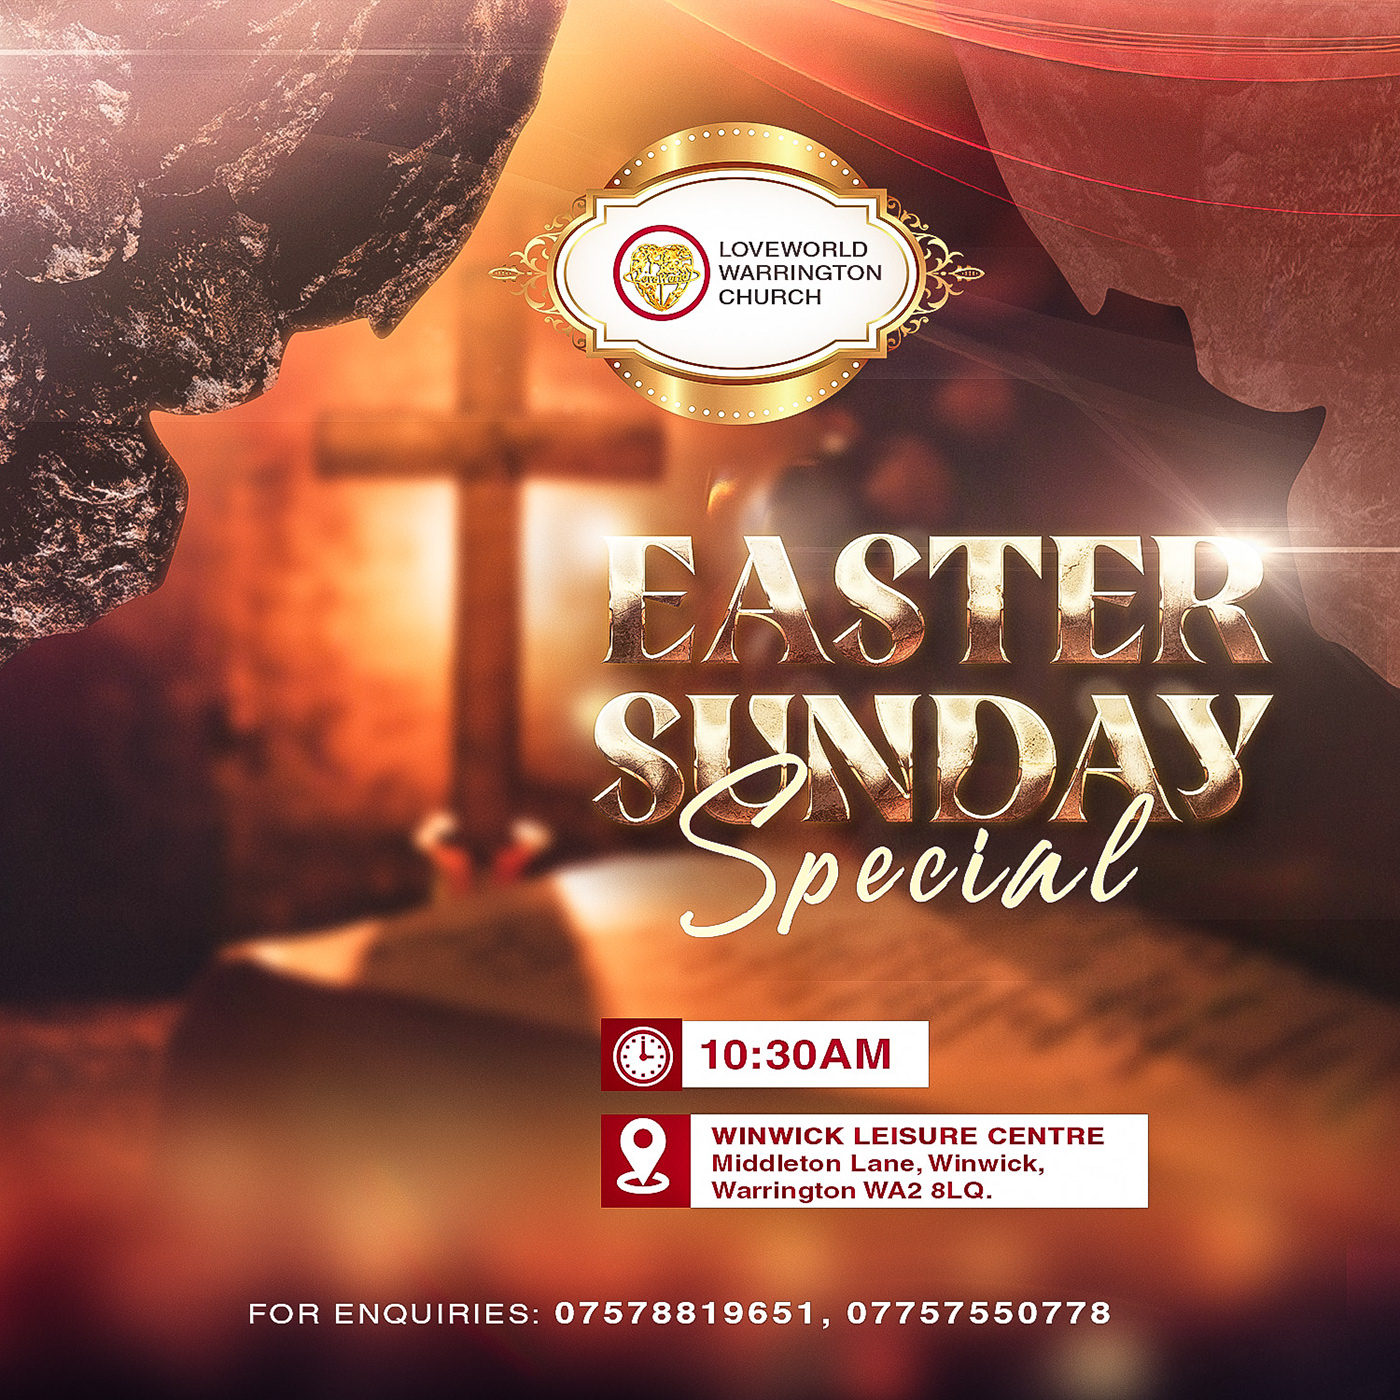 Church Flyer graphic design  church design photoshop Easter Special flyer event flyer